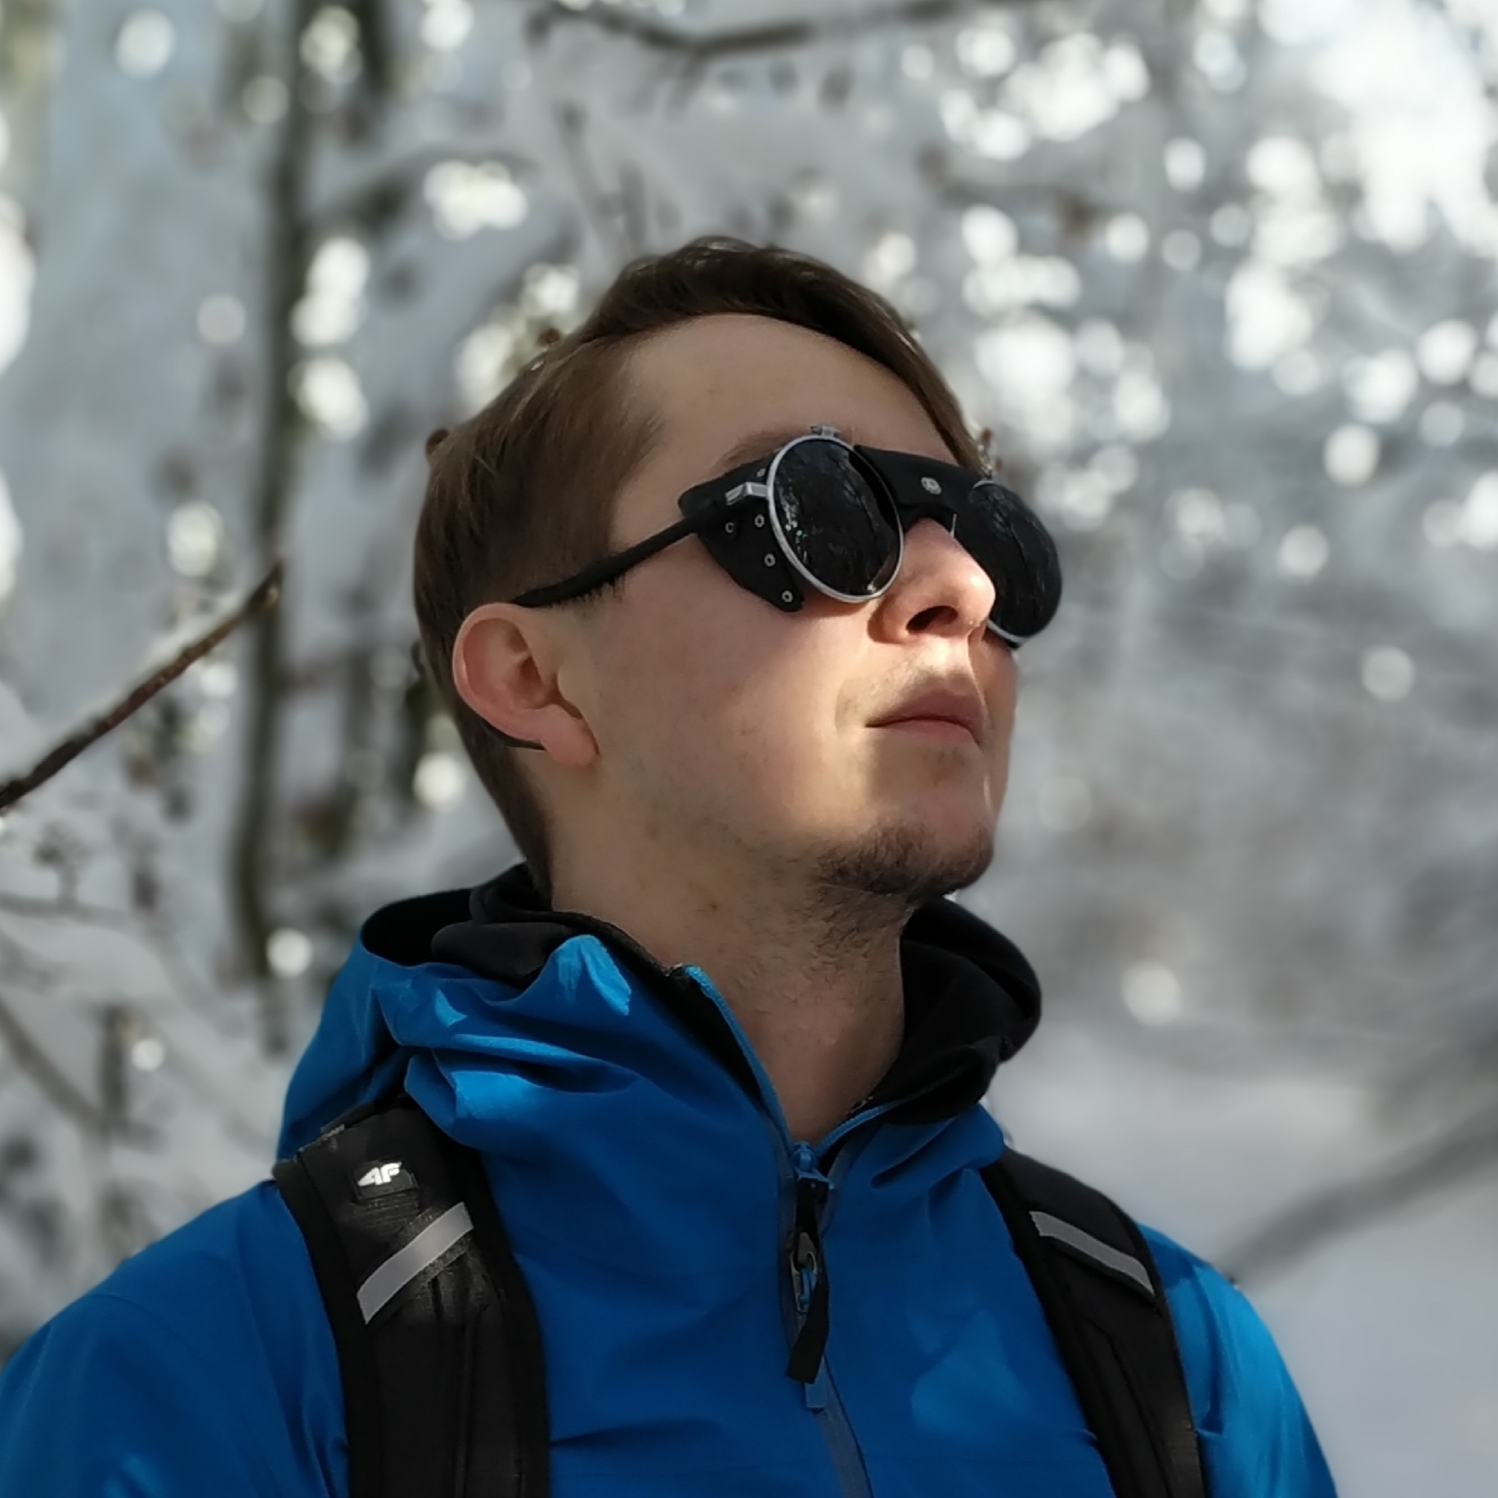 Photo of Patryk, a white man with dark brown short hair, wearing a dark blue coat with a black rucksack and with black circular ski goggles on. The background is showing snow covered trees and he's looking upwards to the right.